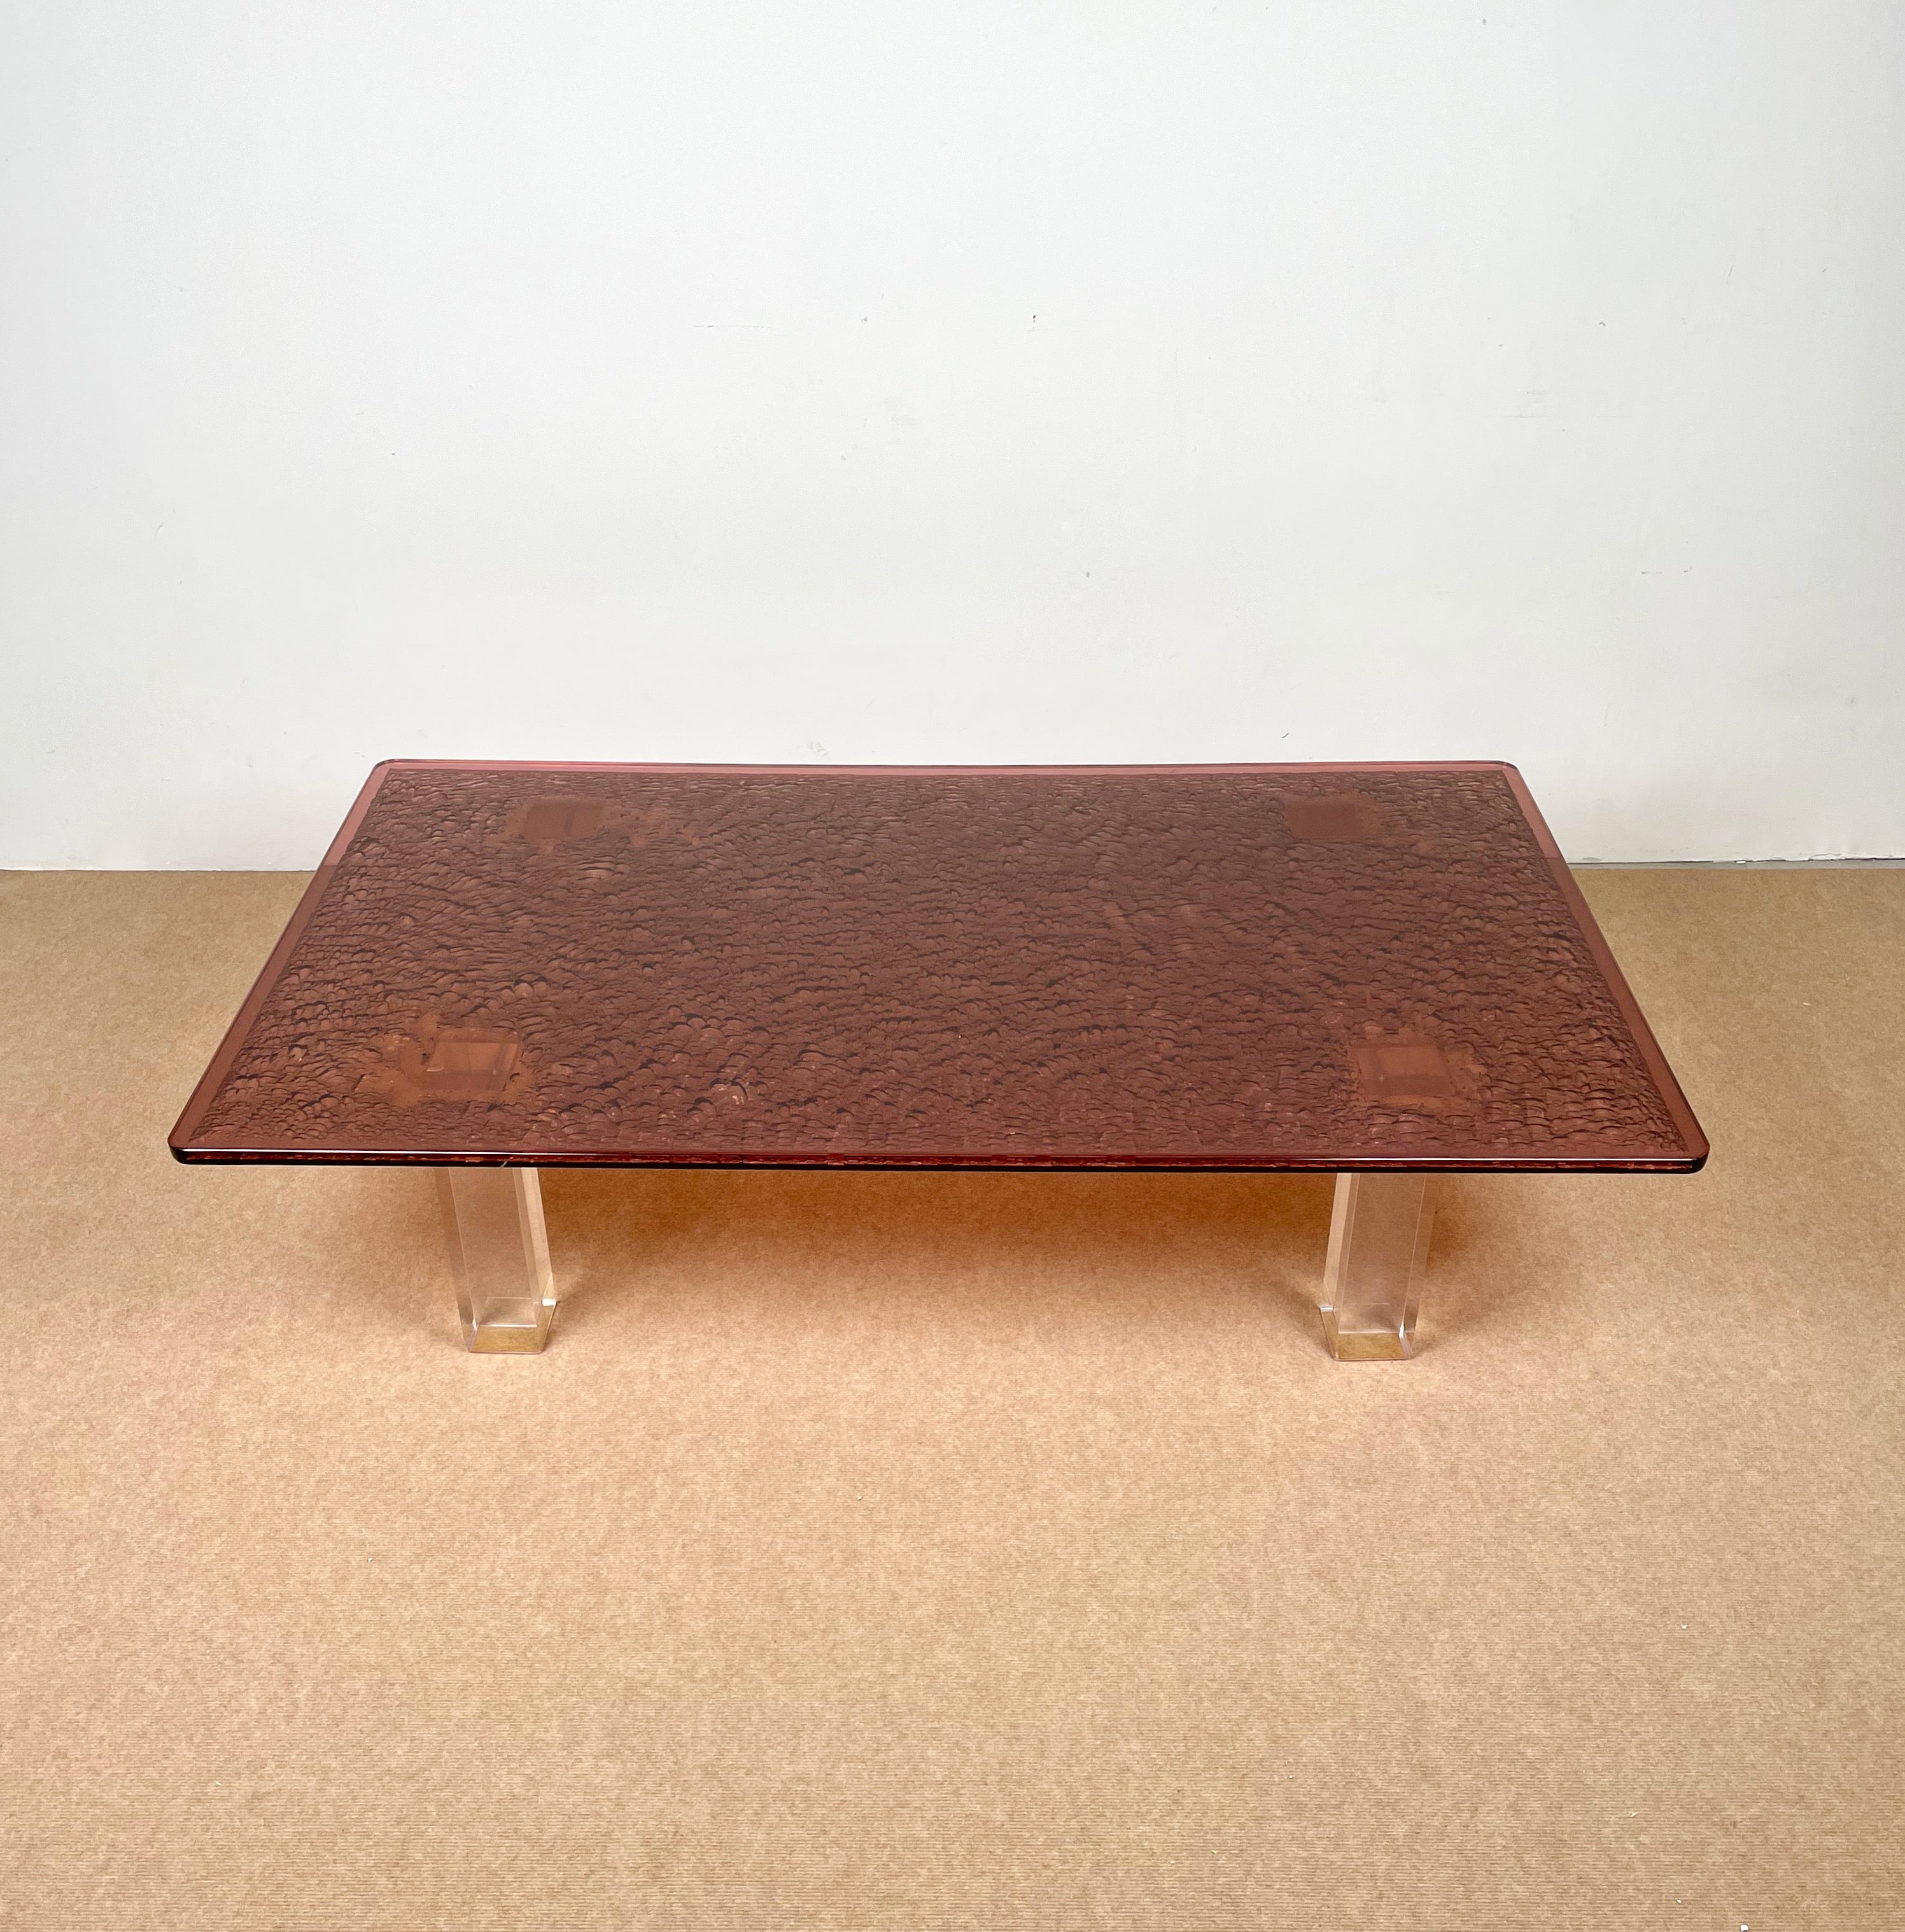 Rectangular coffee table with surface in ice-effect purple lucite on four legs in transparent lucite. In the style of the Italian designer Willy Rizzo, made in Italy in the 1980s.